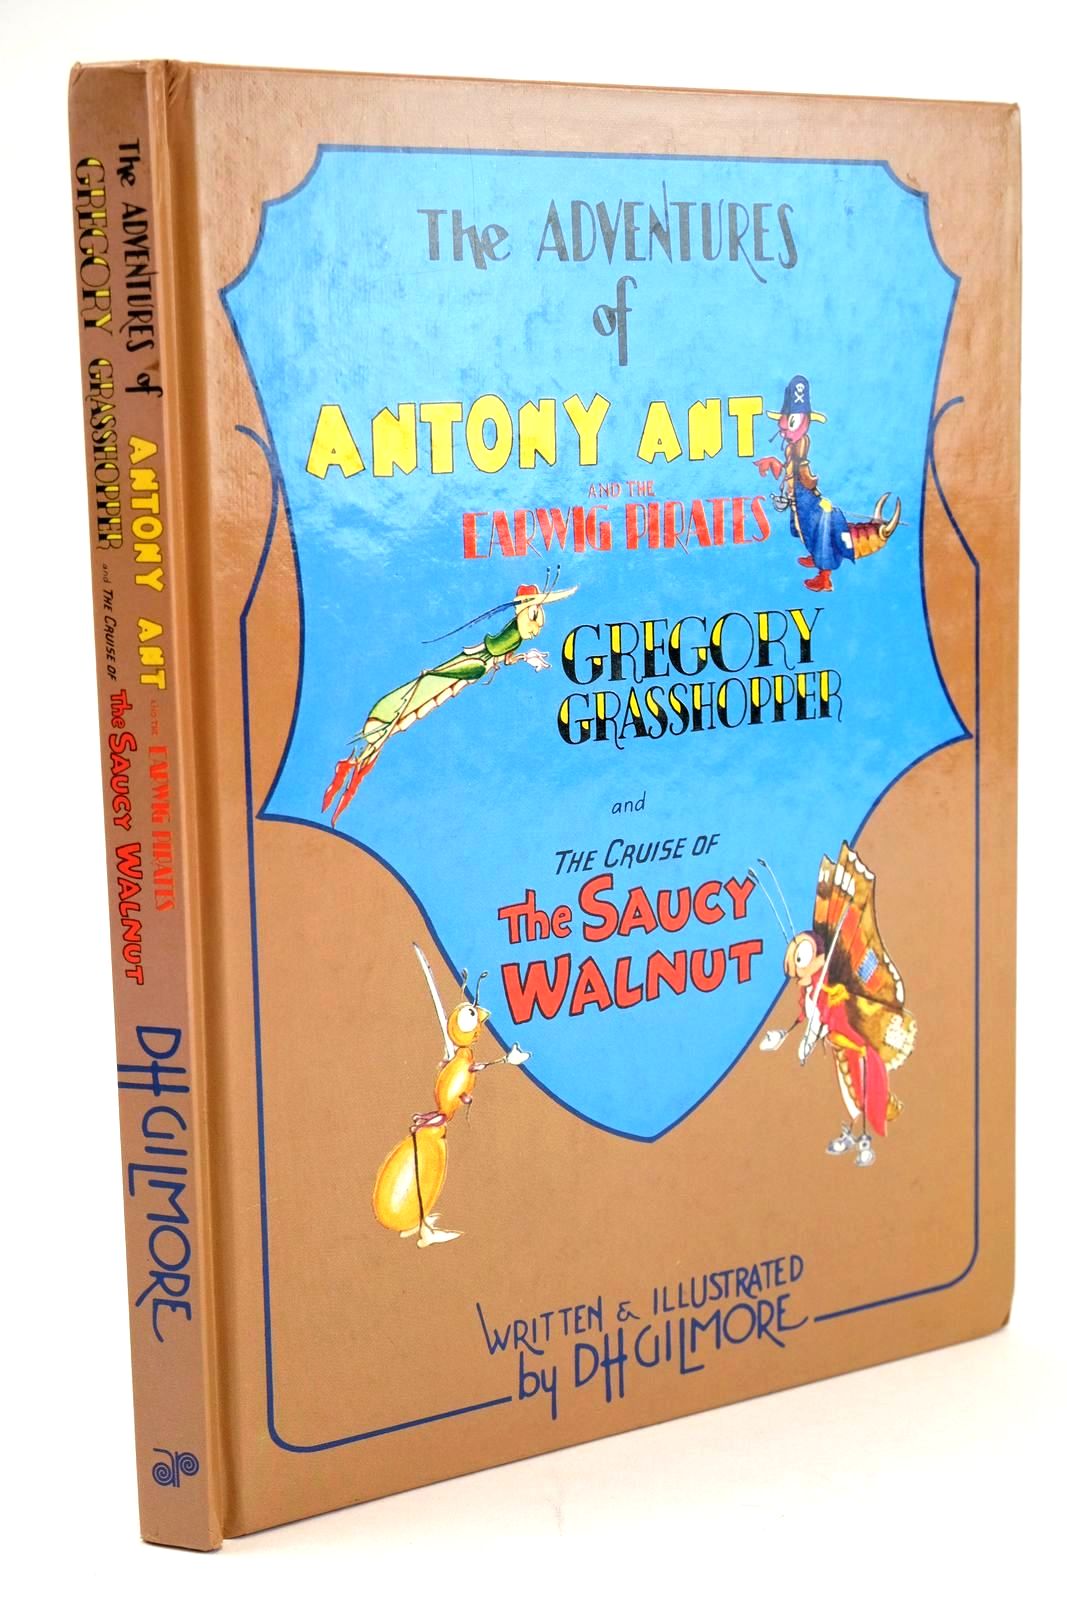 Photo of THE ADVENTURES OF ANTONY ANT AND THE EARWIG PIRATES, GREGORY GRASSHOPPER AND THE CRUISE OF THE SAUCY WALNUT written by Gilmore, D.H. illustrated by Gilmore, D.H. published by Angus &amp; Robertson Publishers (STOCK CODE: 1325050)  for sale by Stella & Rose's Books